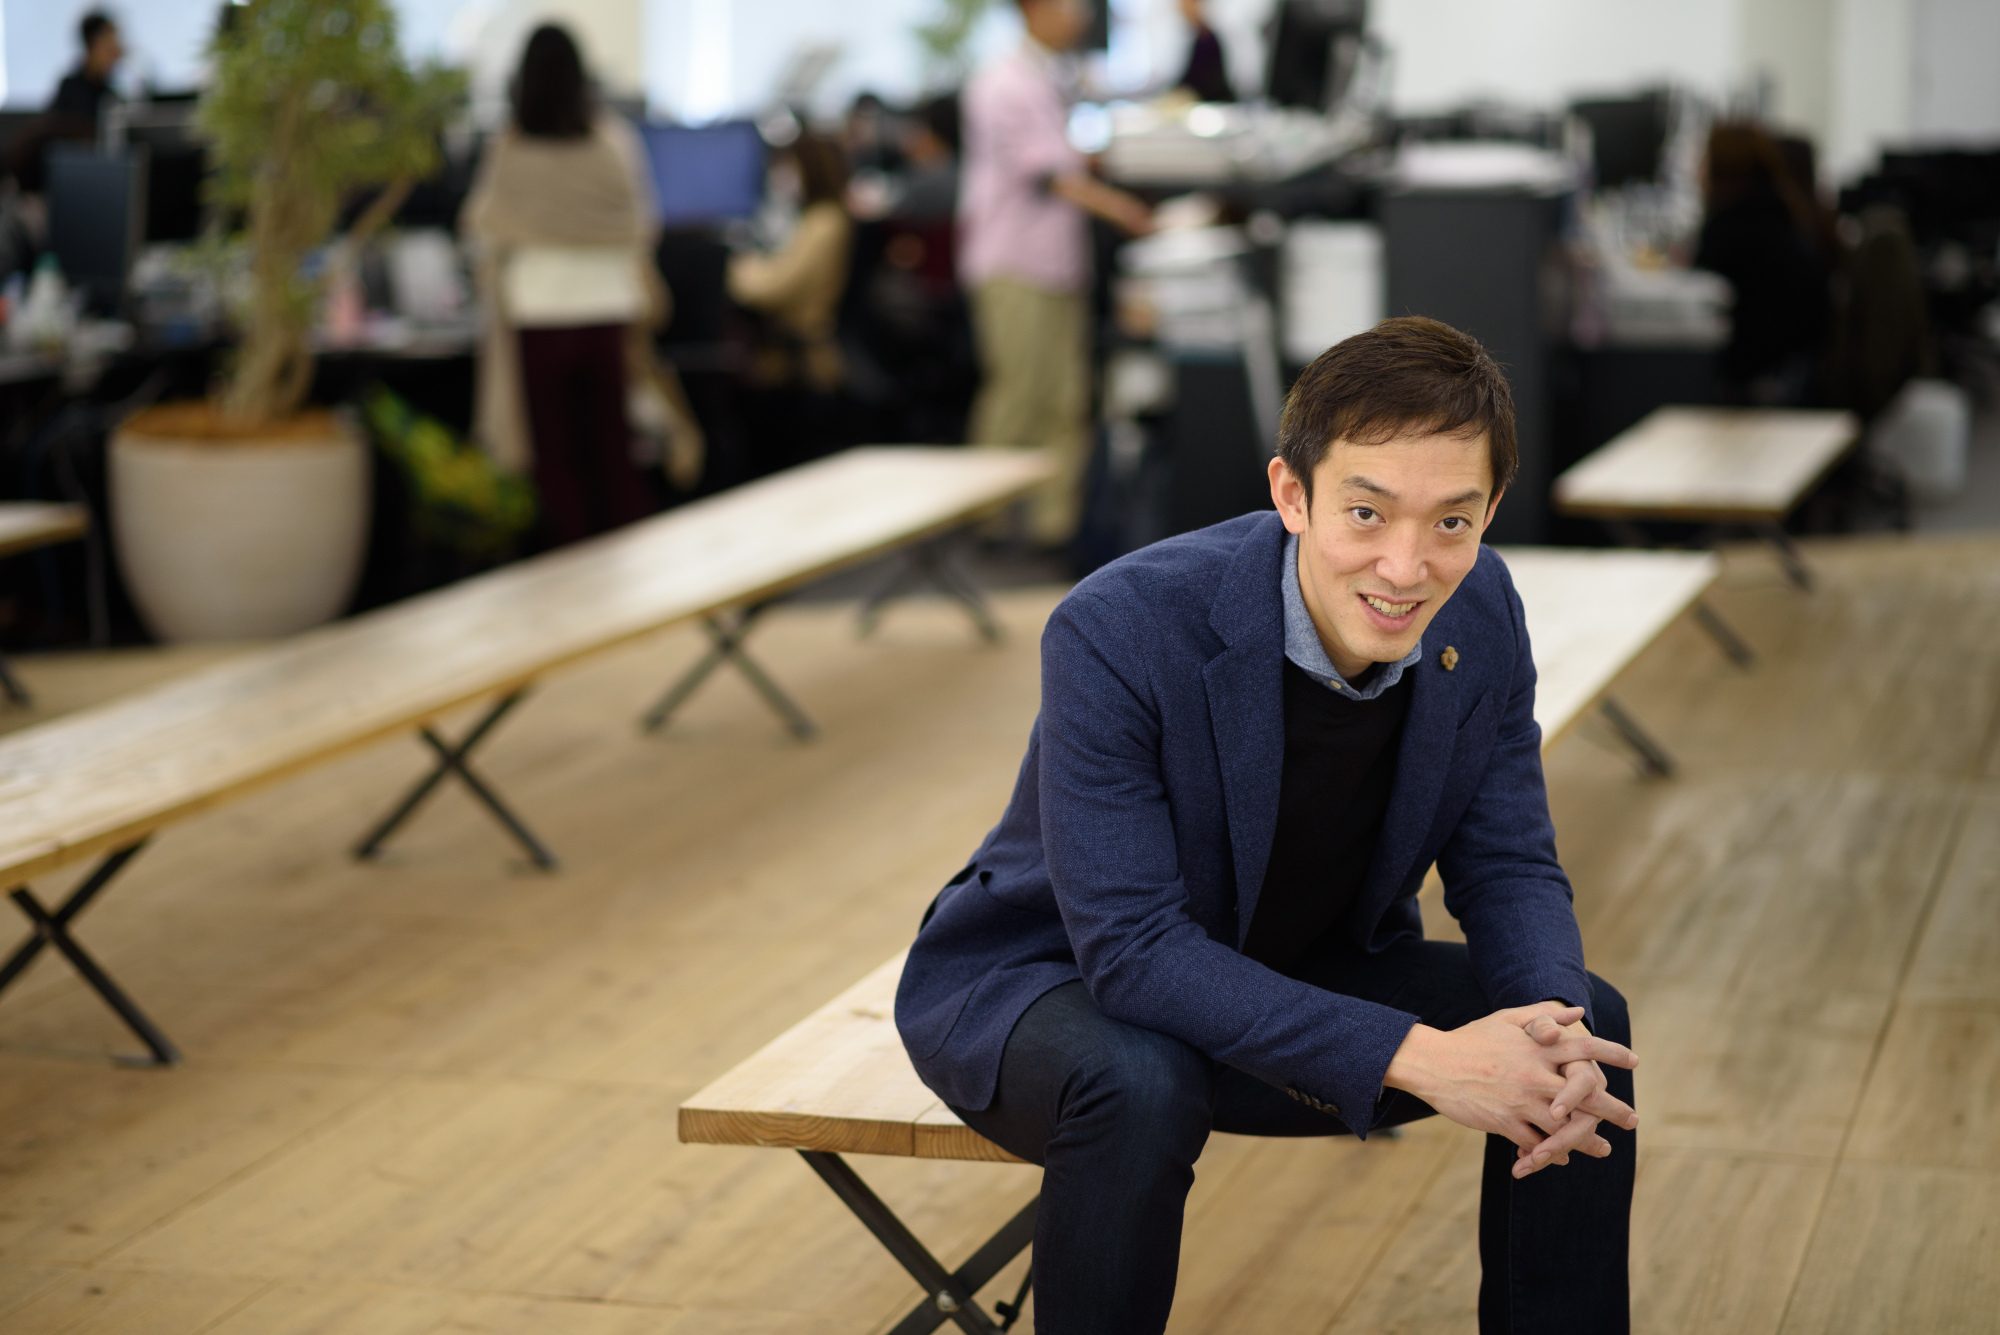 Japanese startup Sansan seeks to change how we see business cards